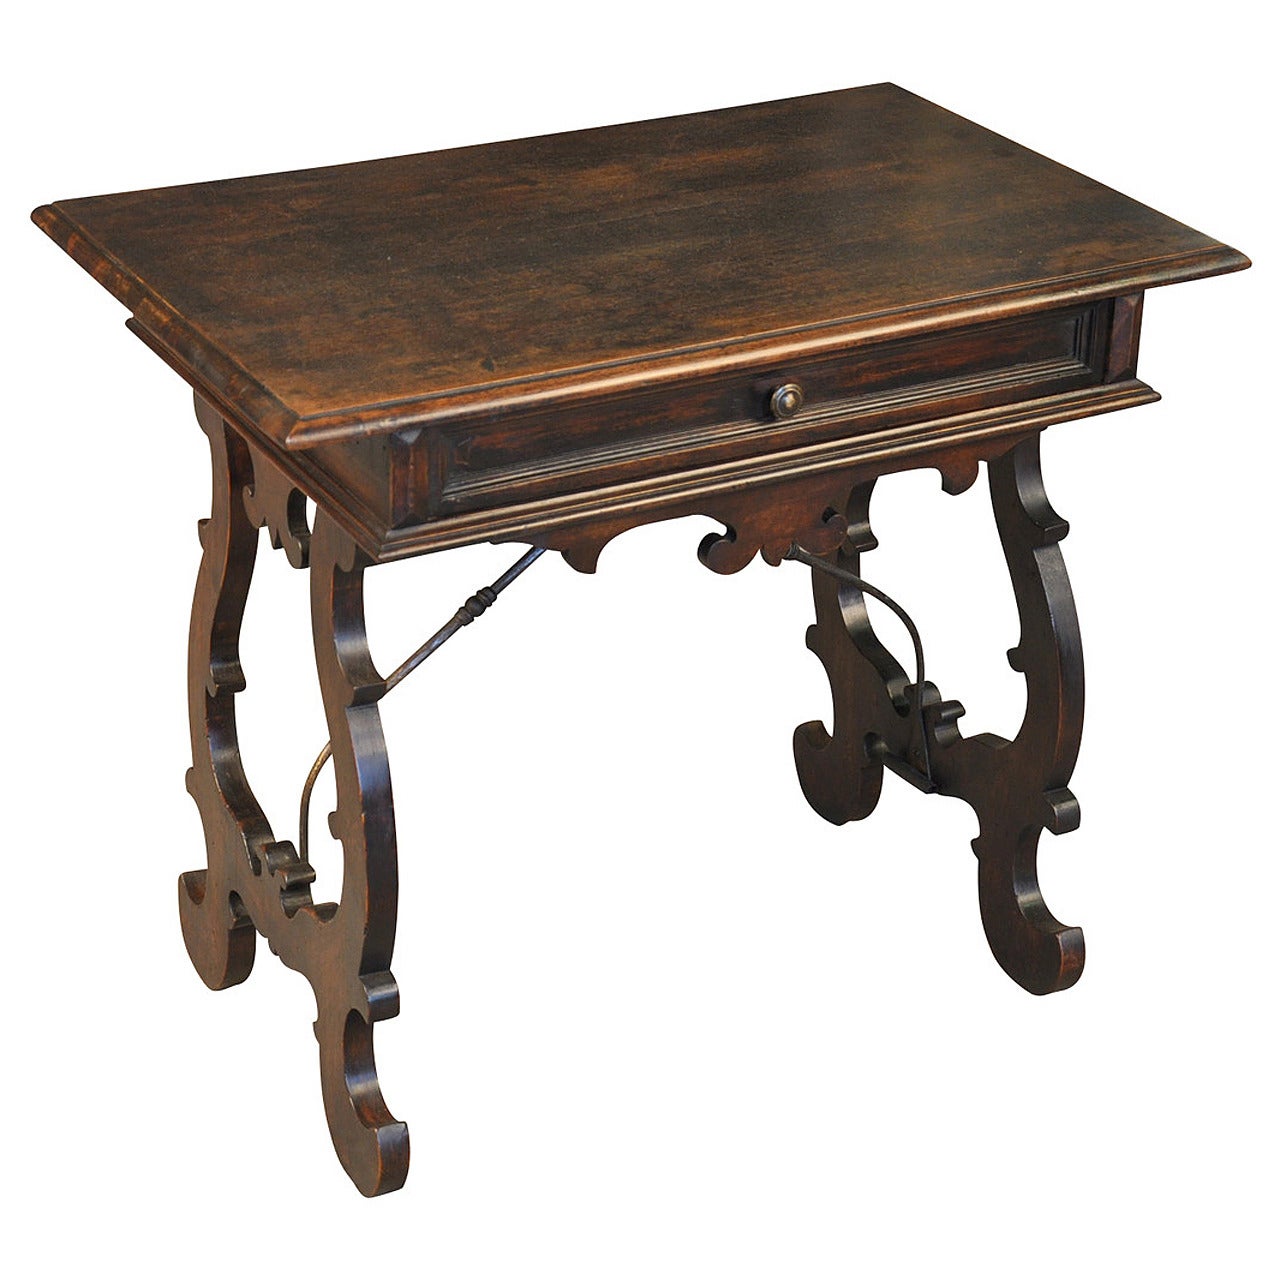 Late 19th Century Italian Side Table In Walnut With Iron Stretchers.